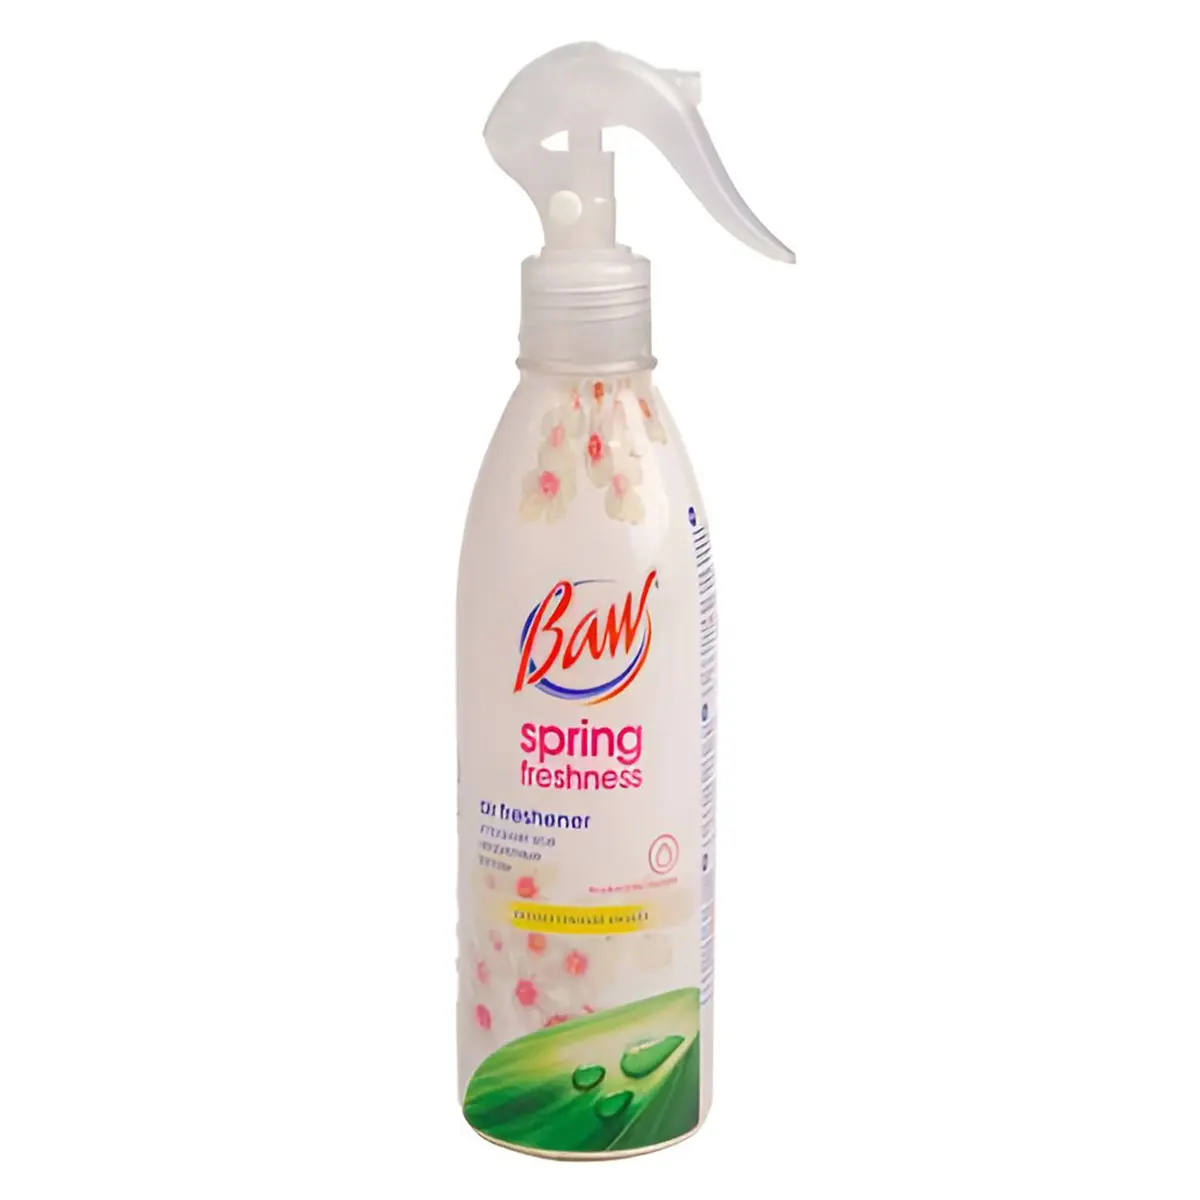 Factory supply air freshener 450gr for a long time refreshing the premises with gentle and pleasant aromas